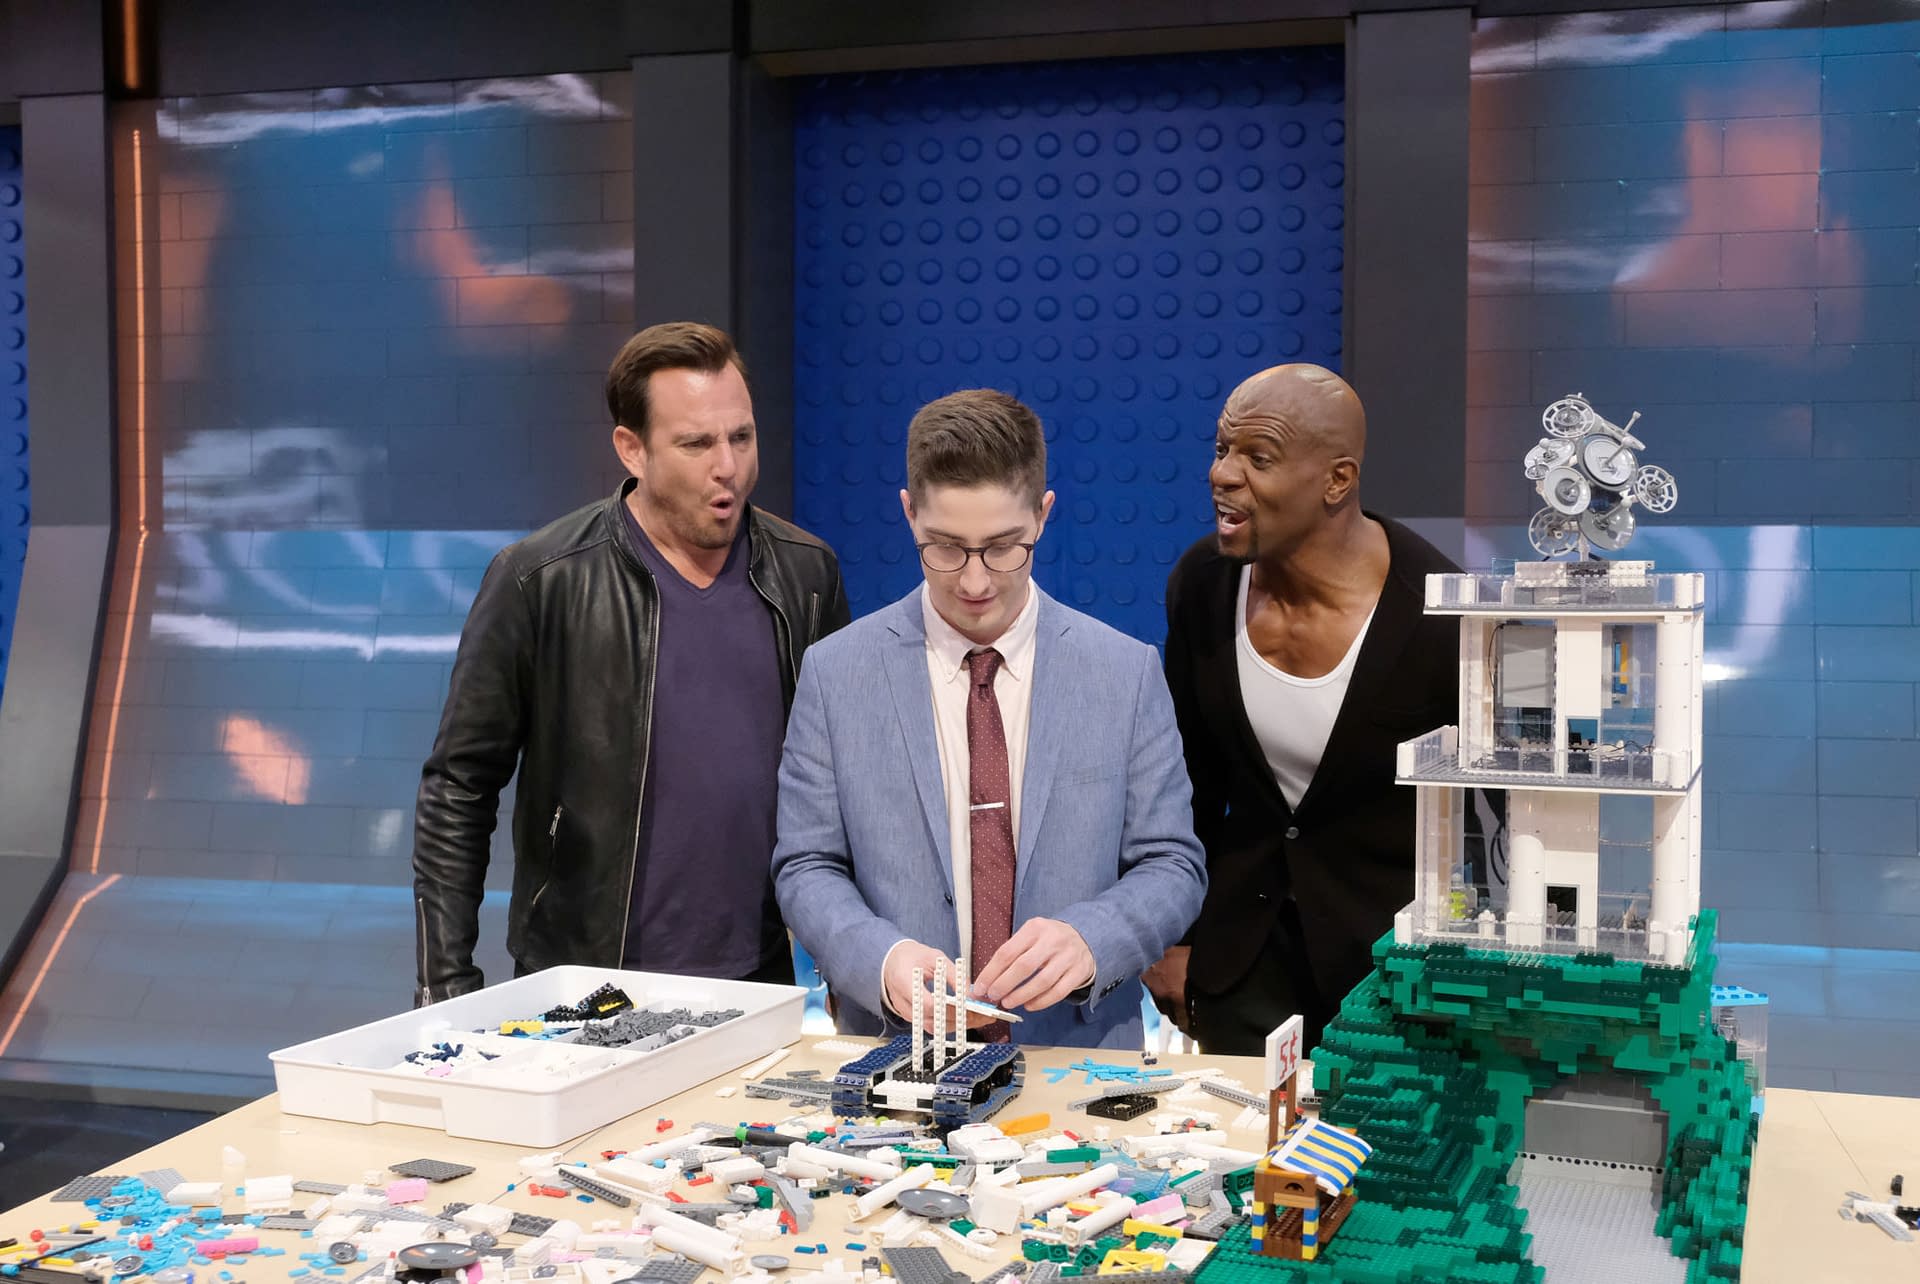 "LEGO Masters" Featuring "Star Wars" Theme; Guest Stars Mayim Bialik, Terry Crews, R2-D2 &#038; More [PREVIEW]